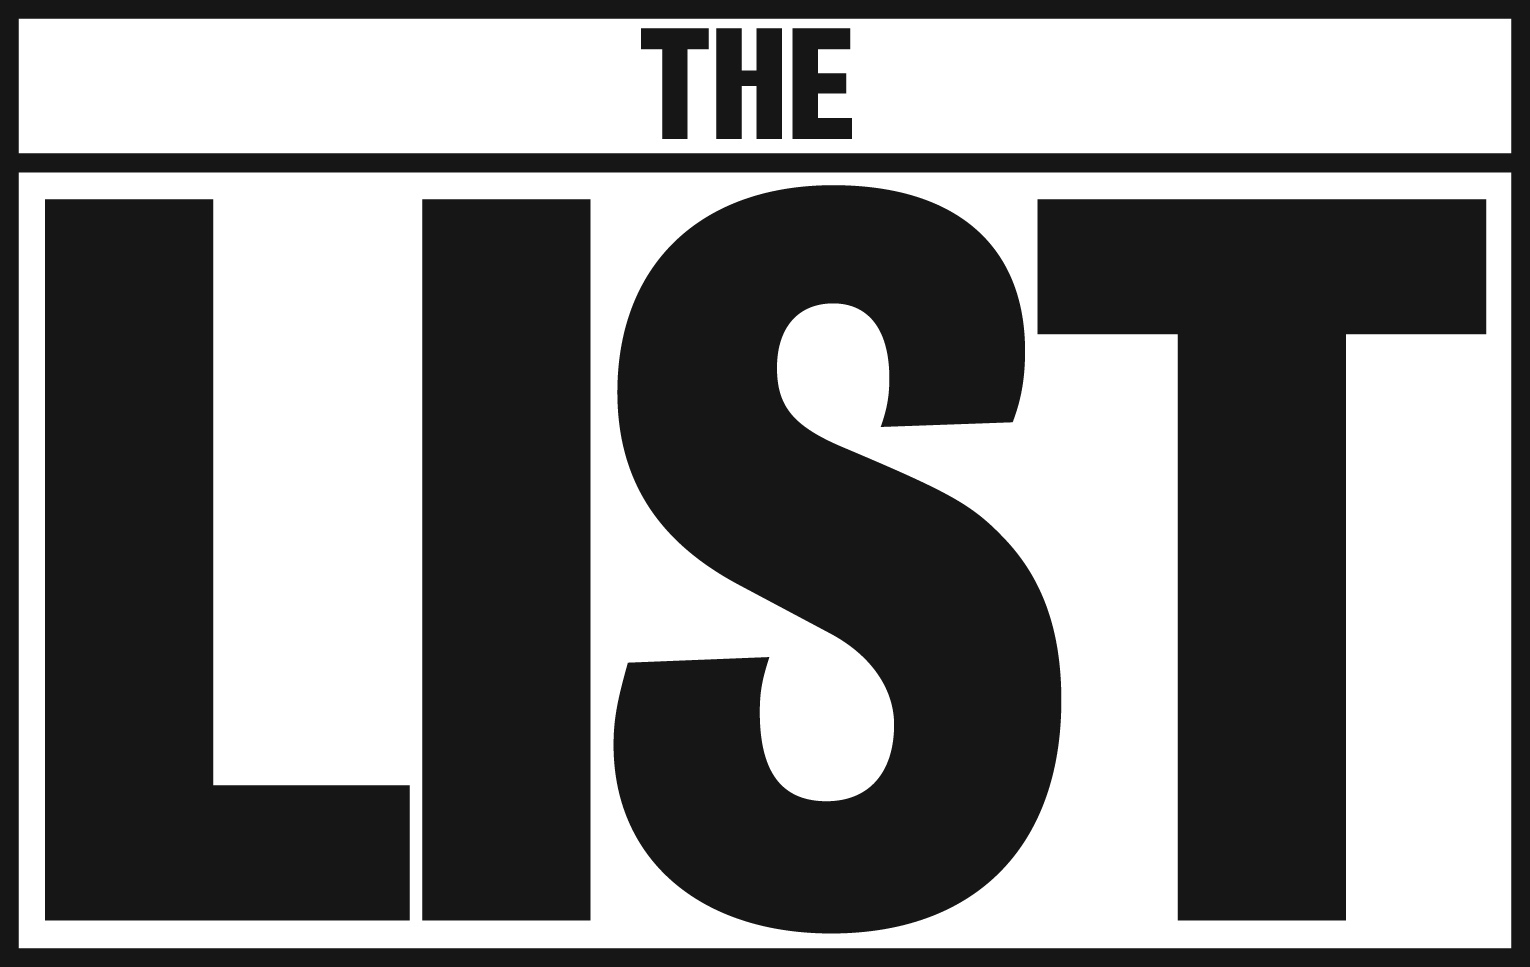 Contini Awards - The List Eating & Drinking Guide 2018/19 | Contini